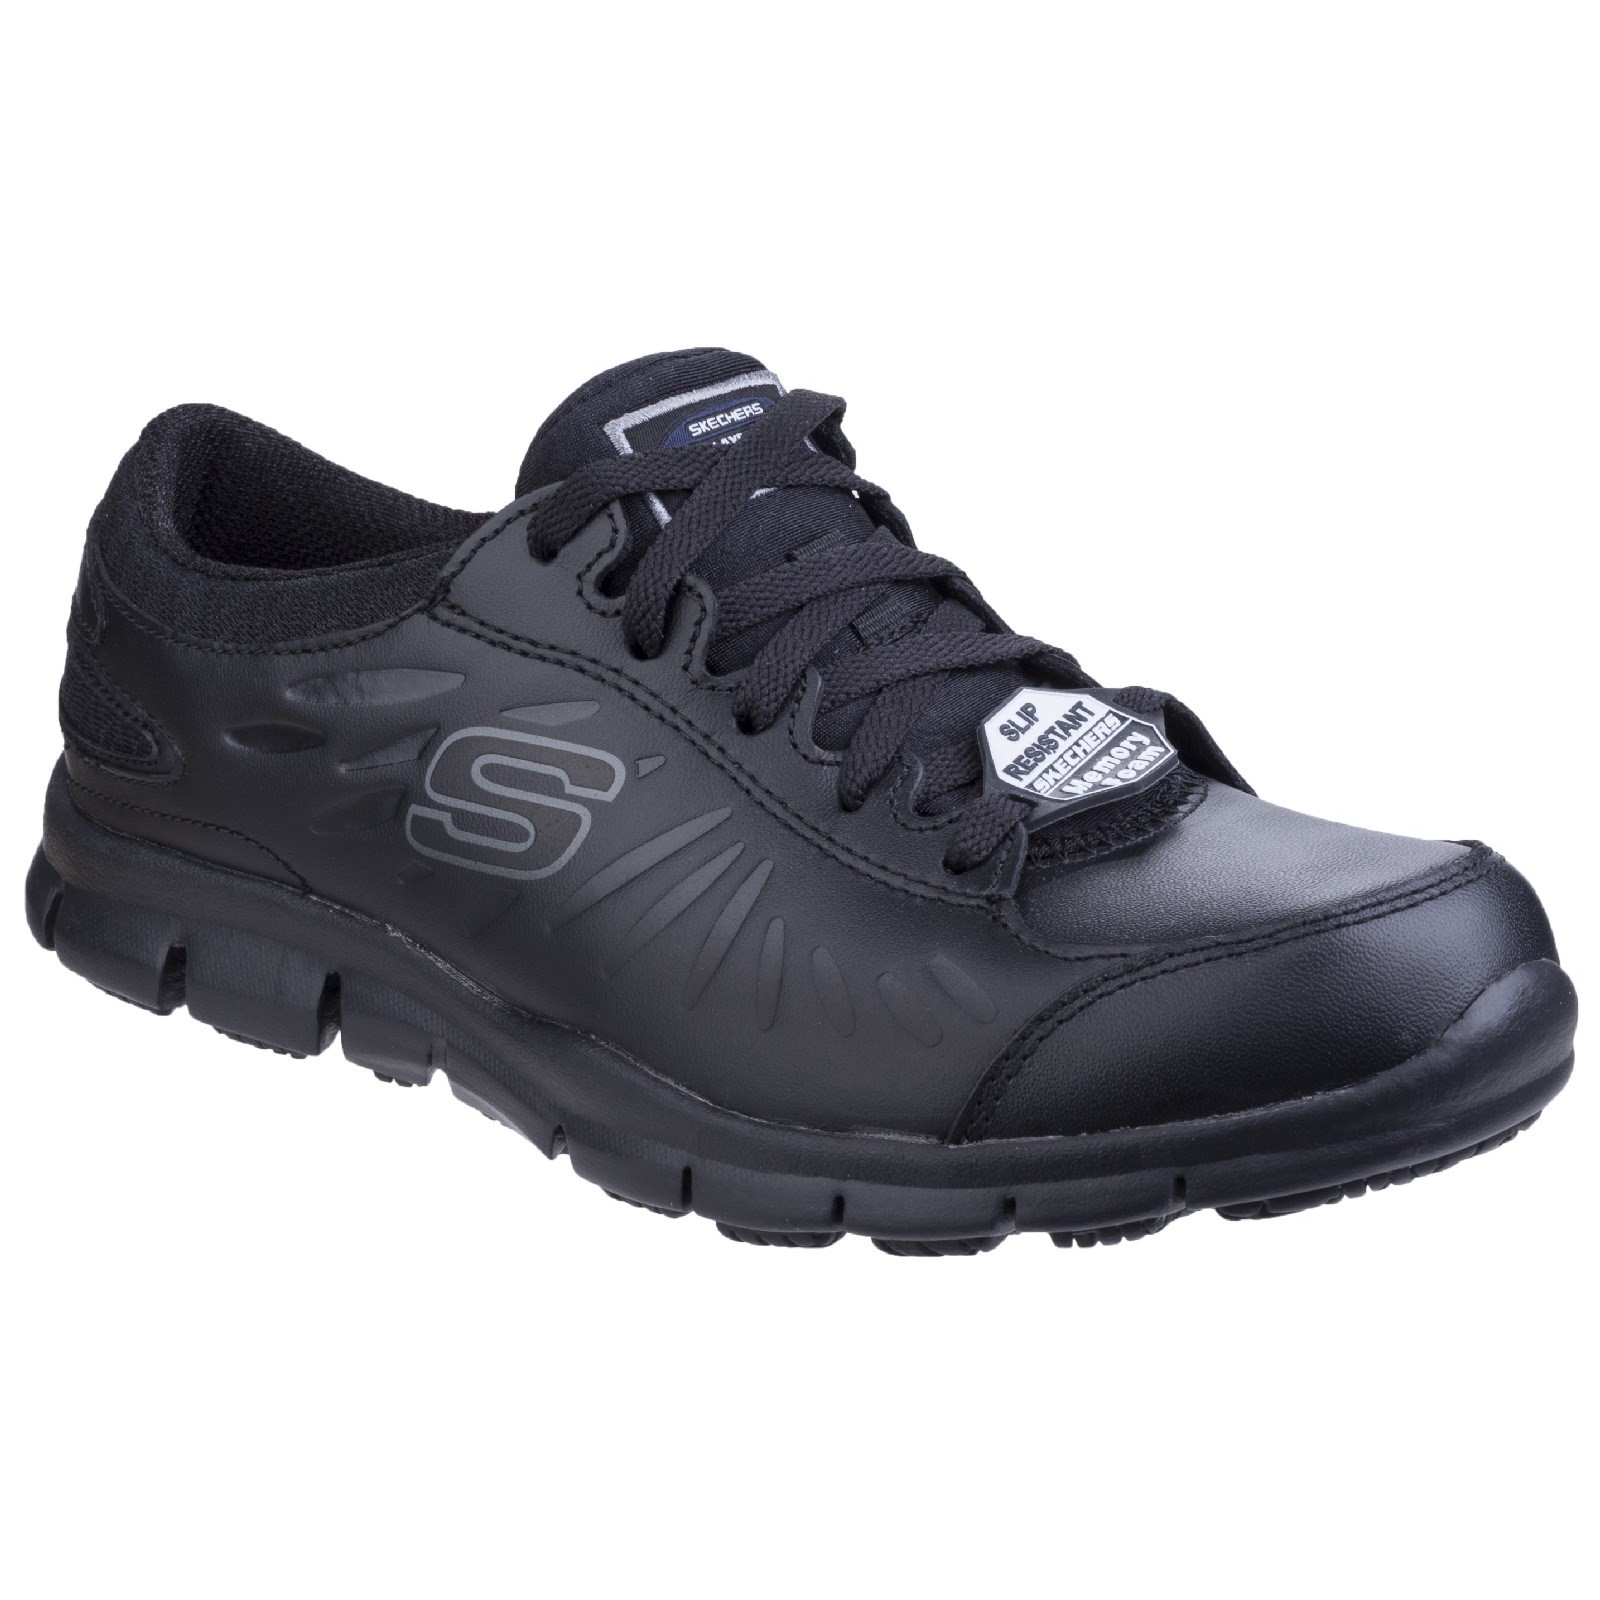 Eldred Lace Up Occupational Shoe